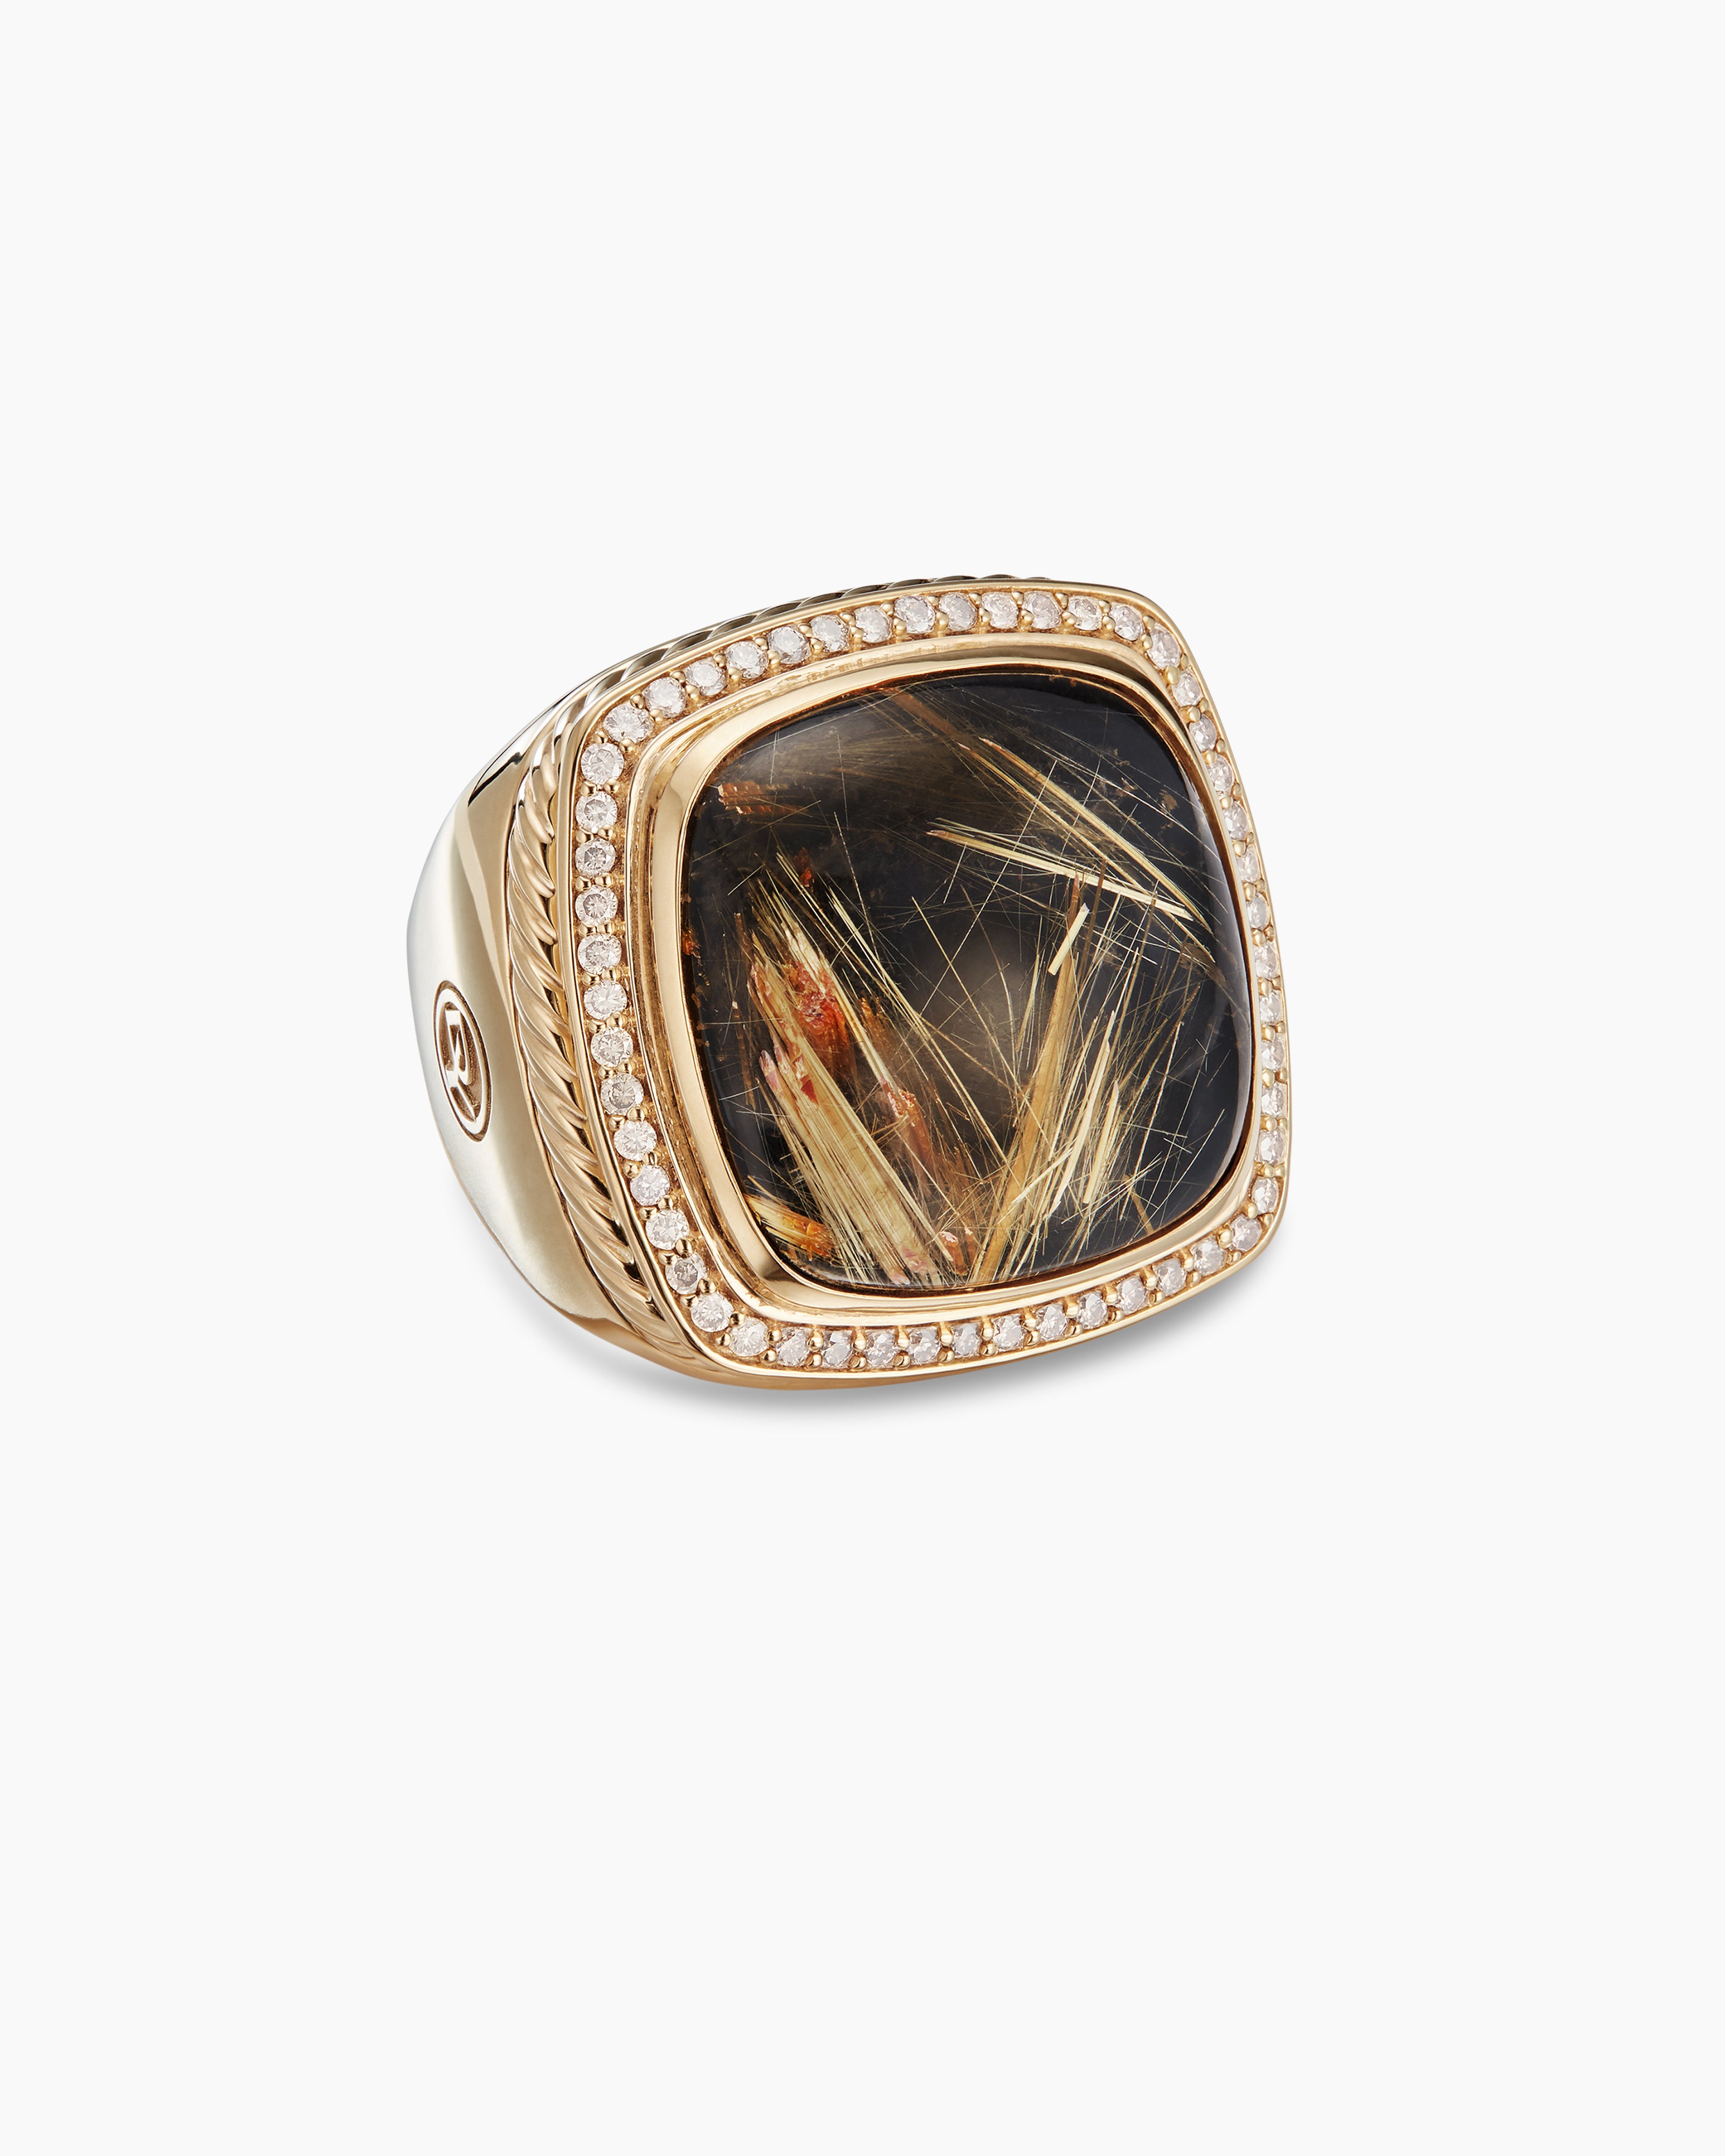 Albion Statement Ring in 18K Yellow Gold with Pavé, 20mm